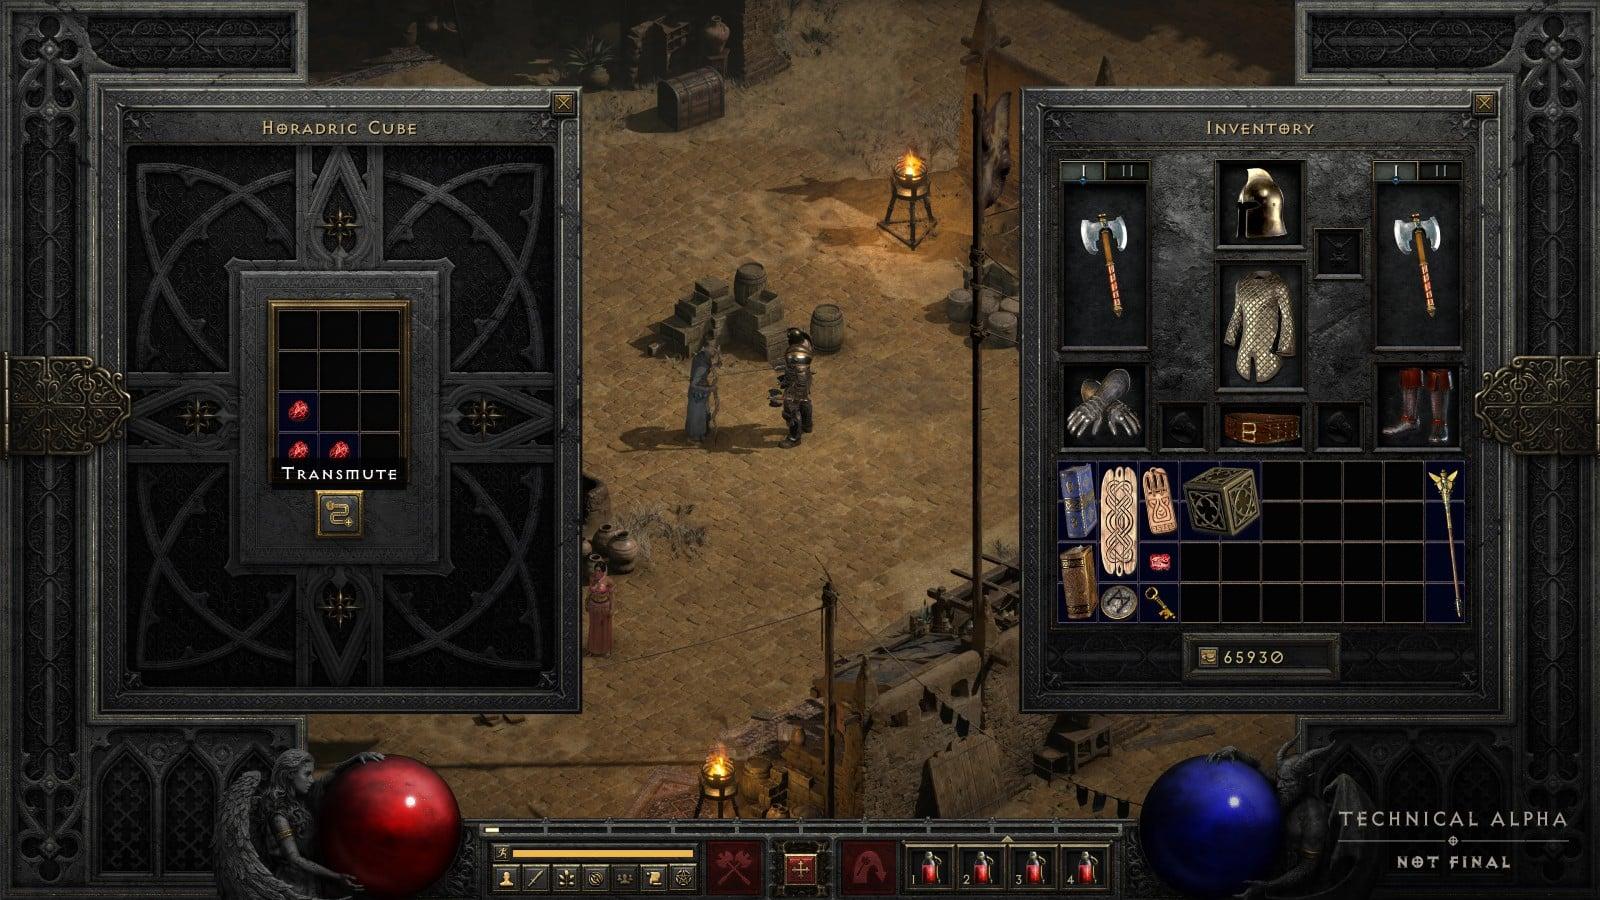 An image of the Horadric Cube in Diablo 2 Resurrected